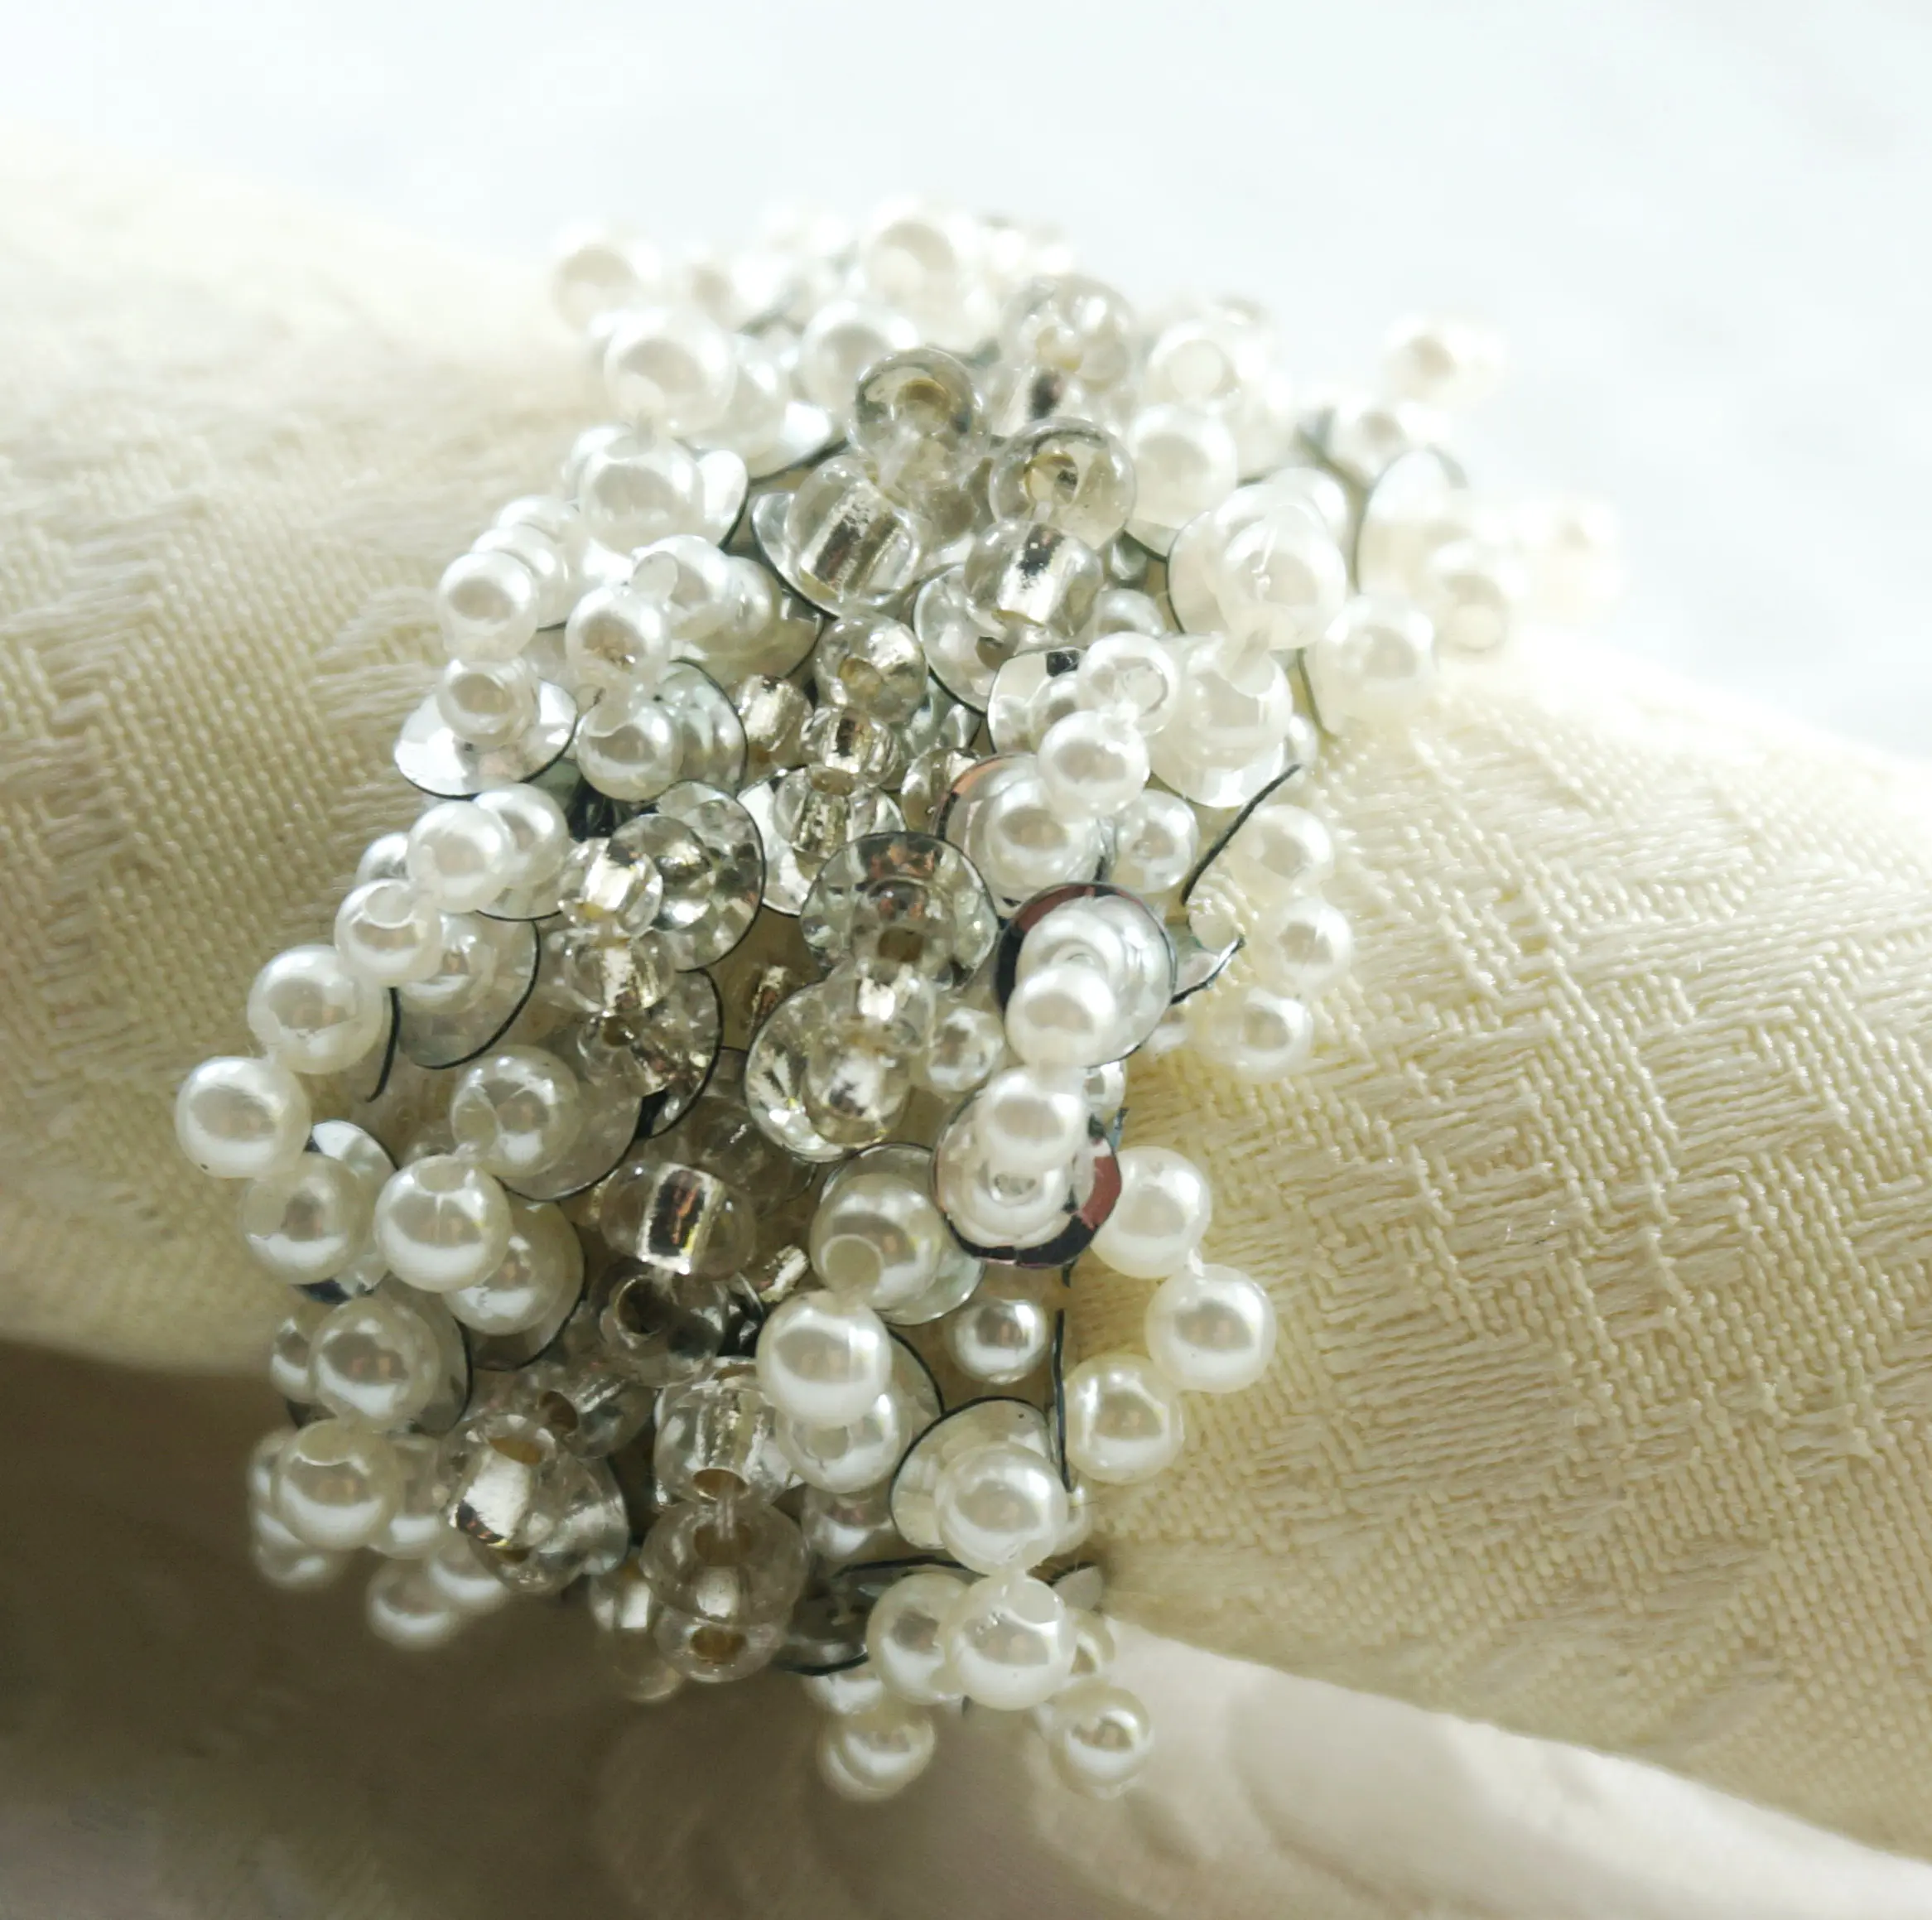 competitive prices fashion pearl napkin ring for wedding , cheap beaded napkin holder, decoration wedding napkin ring